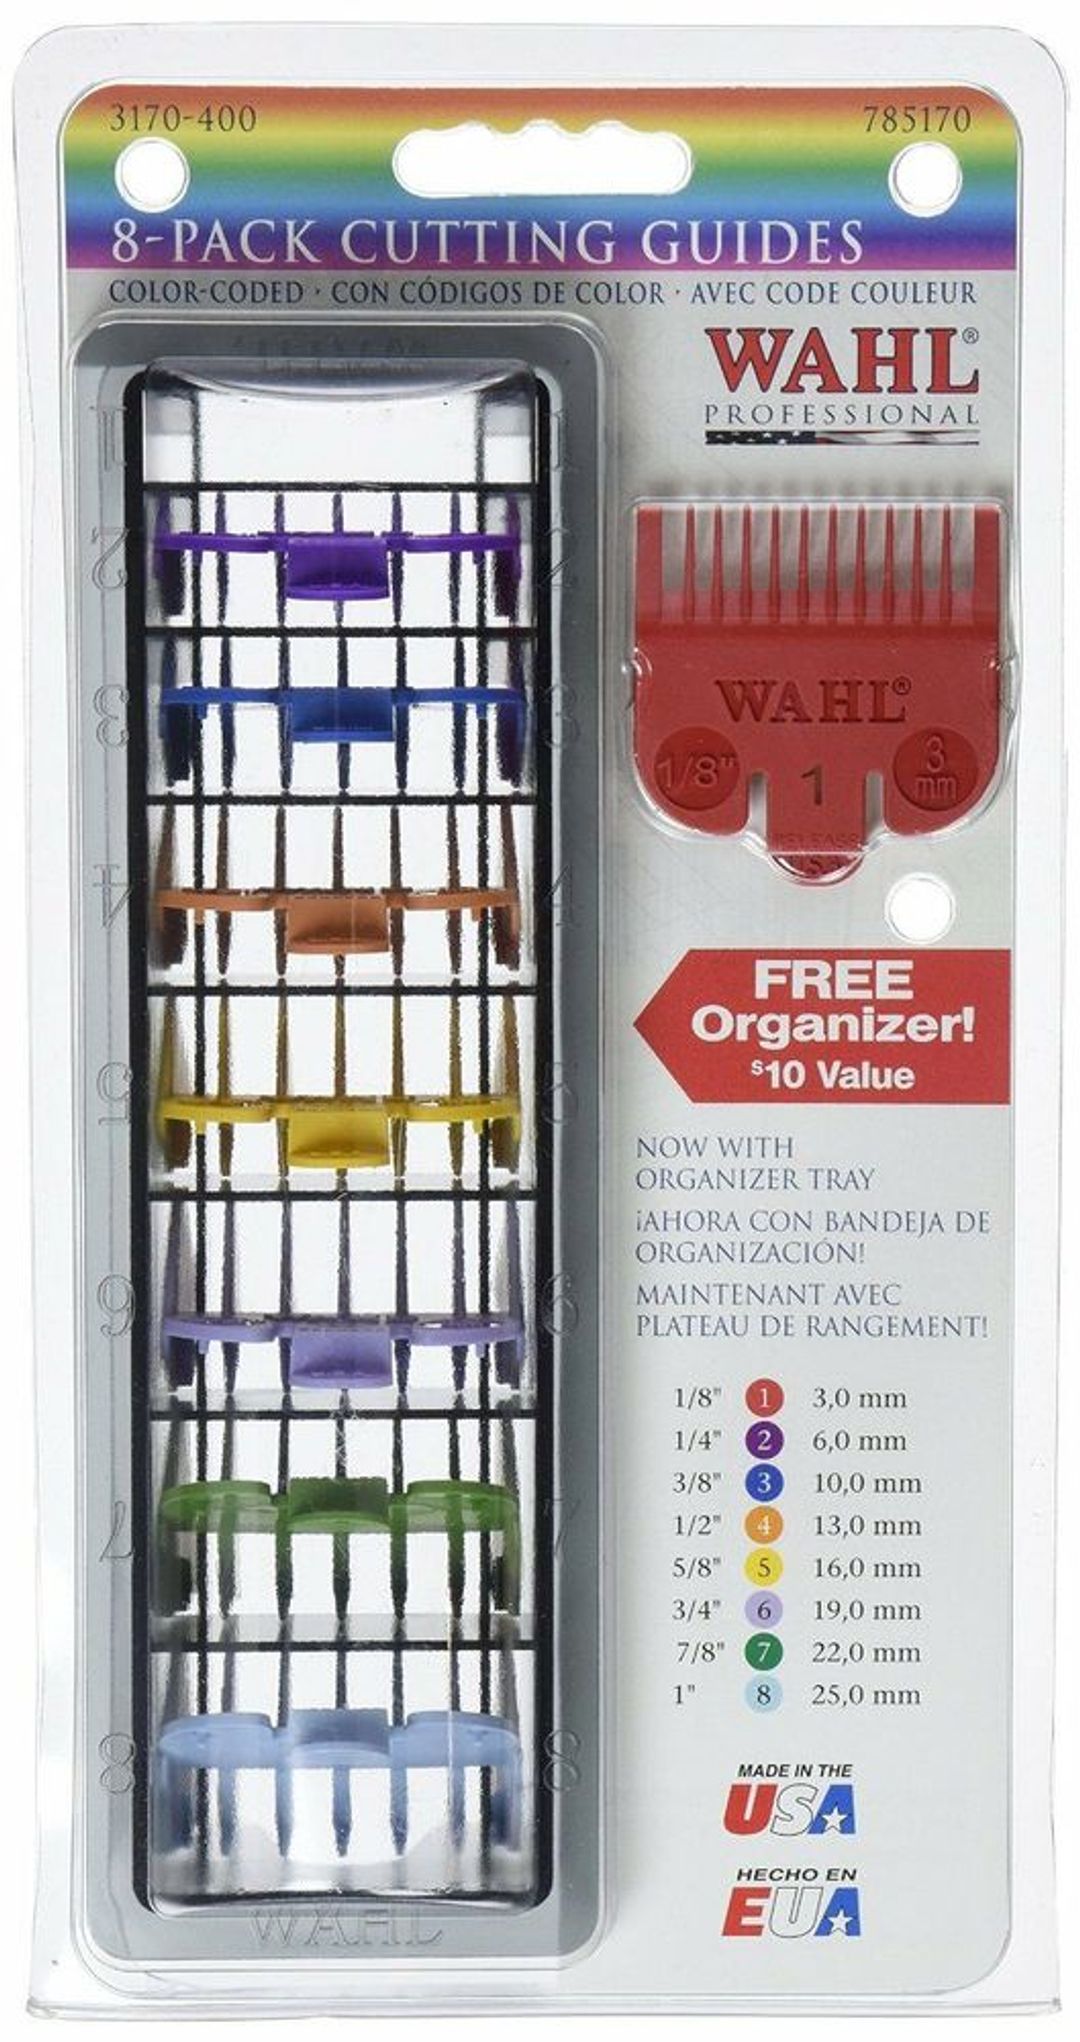 Wahl Colour Coded Hair Cutting Guides - 8 Packs